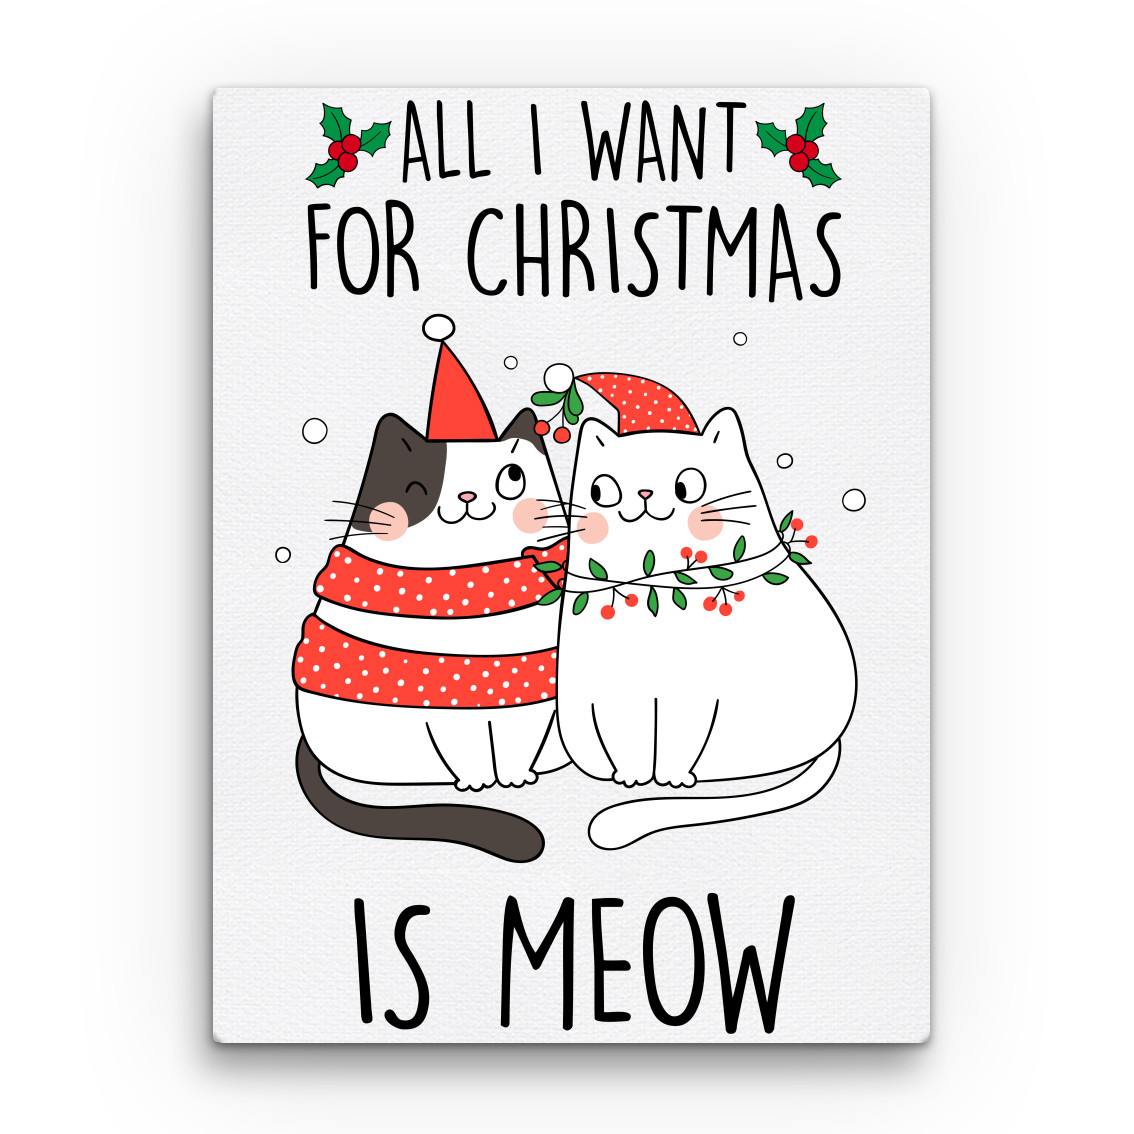 All I want for Christmas is Meow Vászonkép